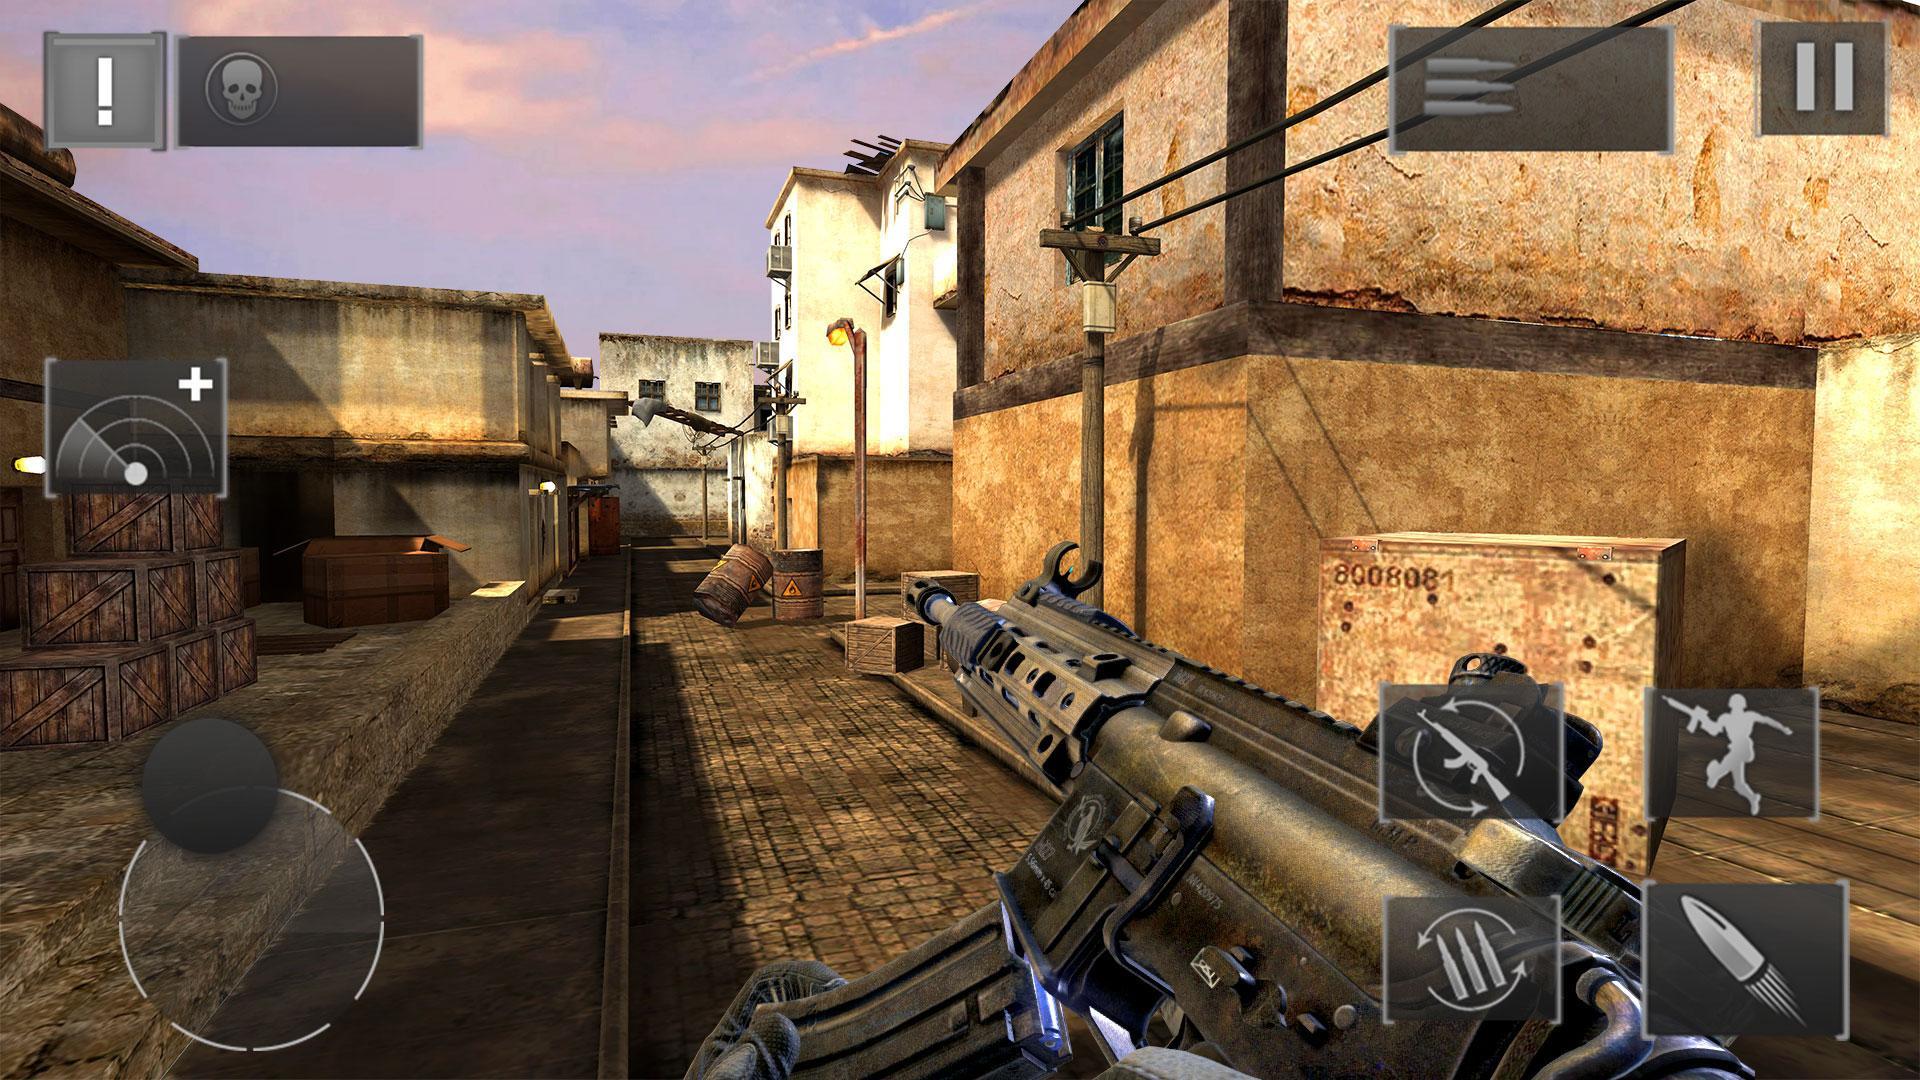 Action Shooting Games 2020 New Gun Games 2020 For Android Apk